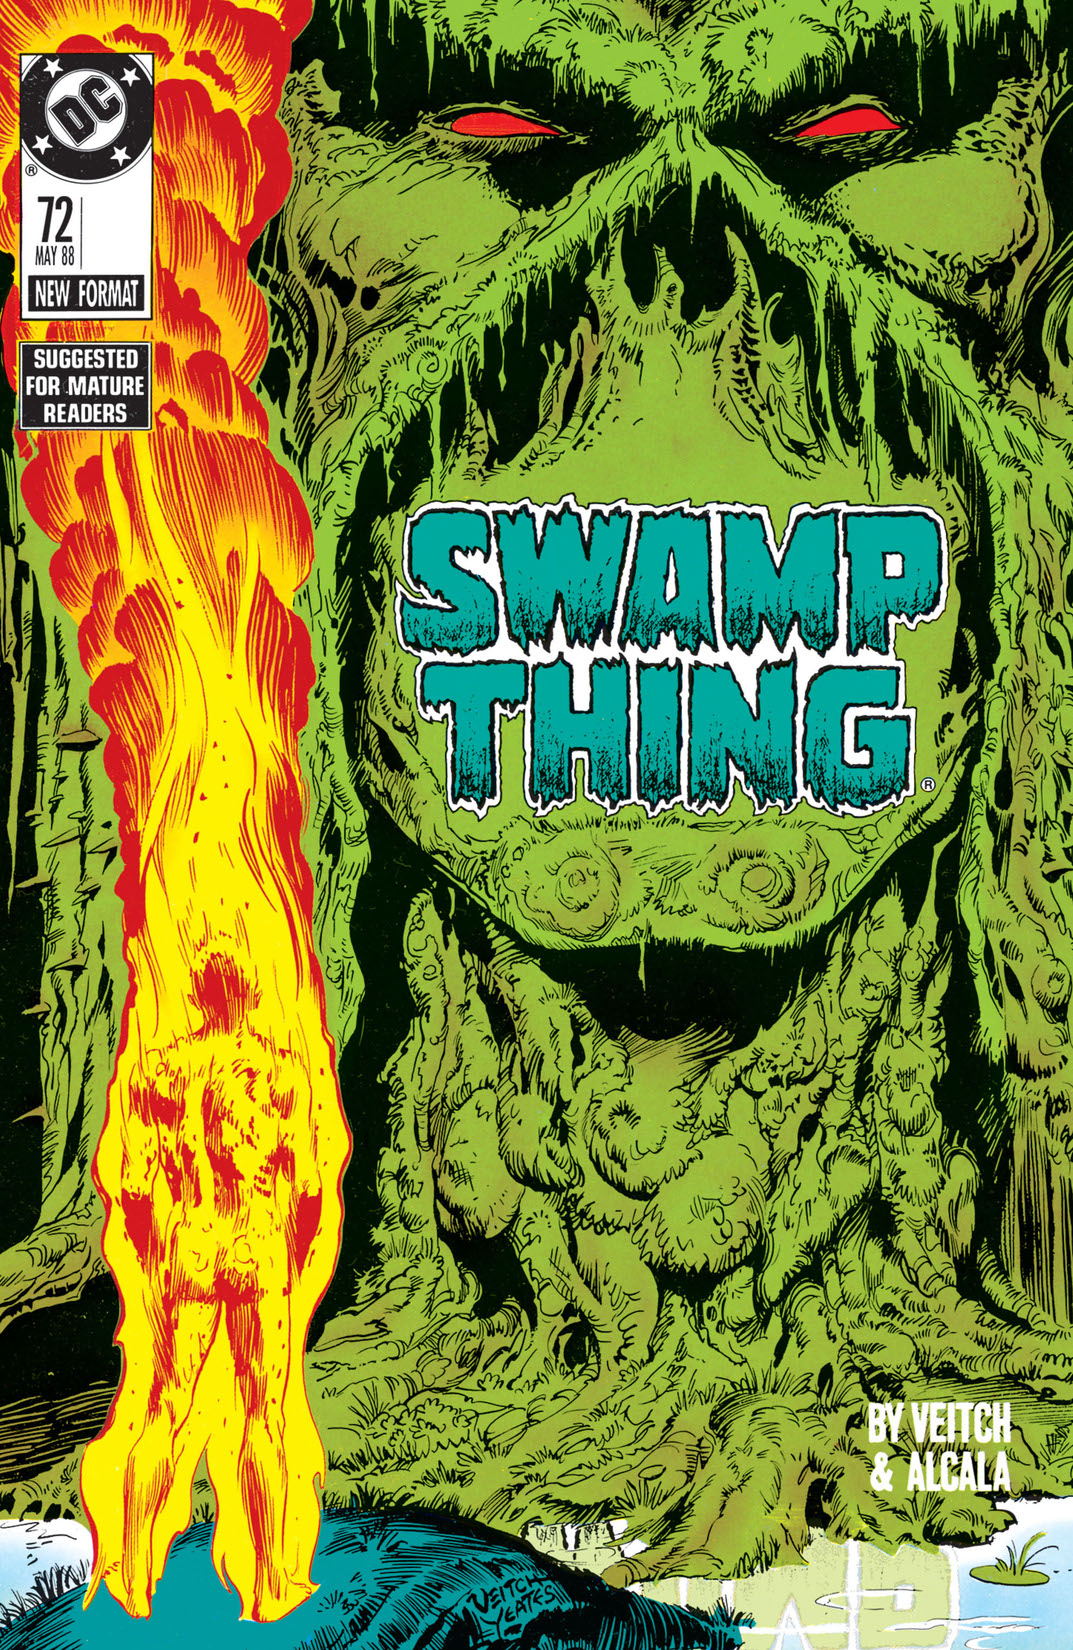 Swamp Thing (1985-1996) #72 preview images